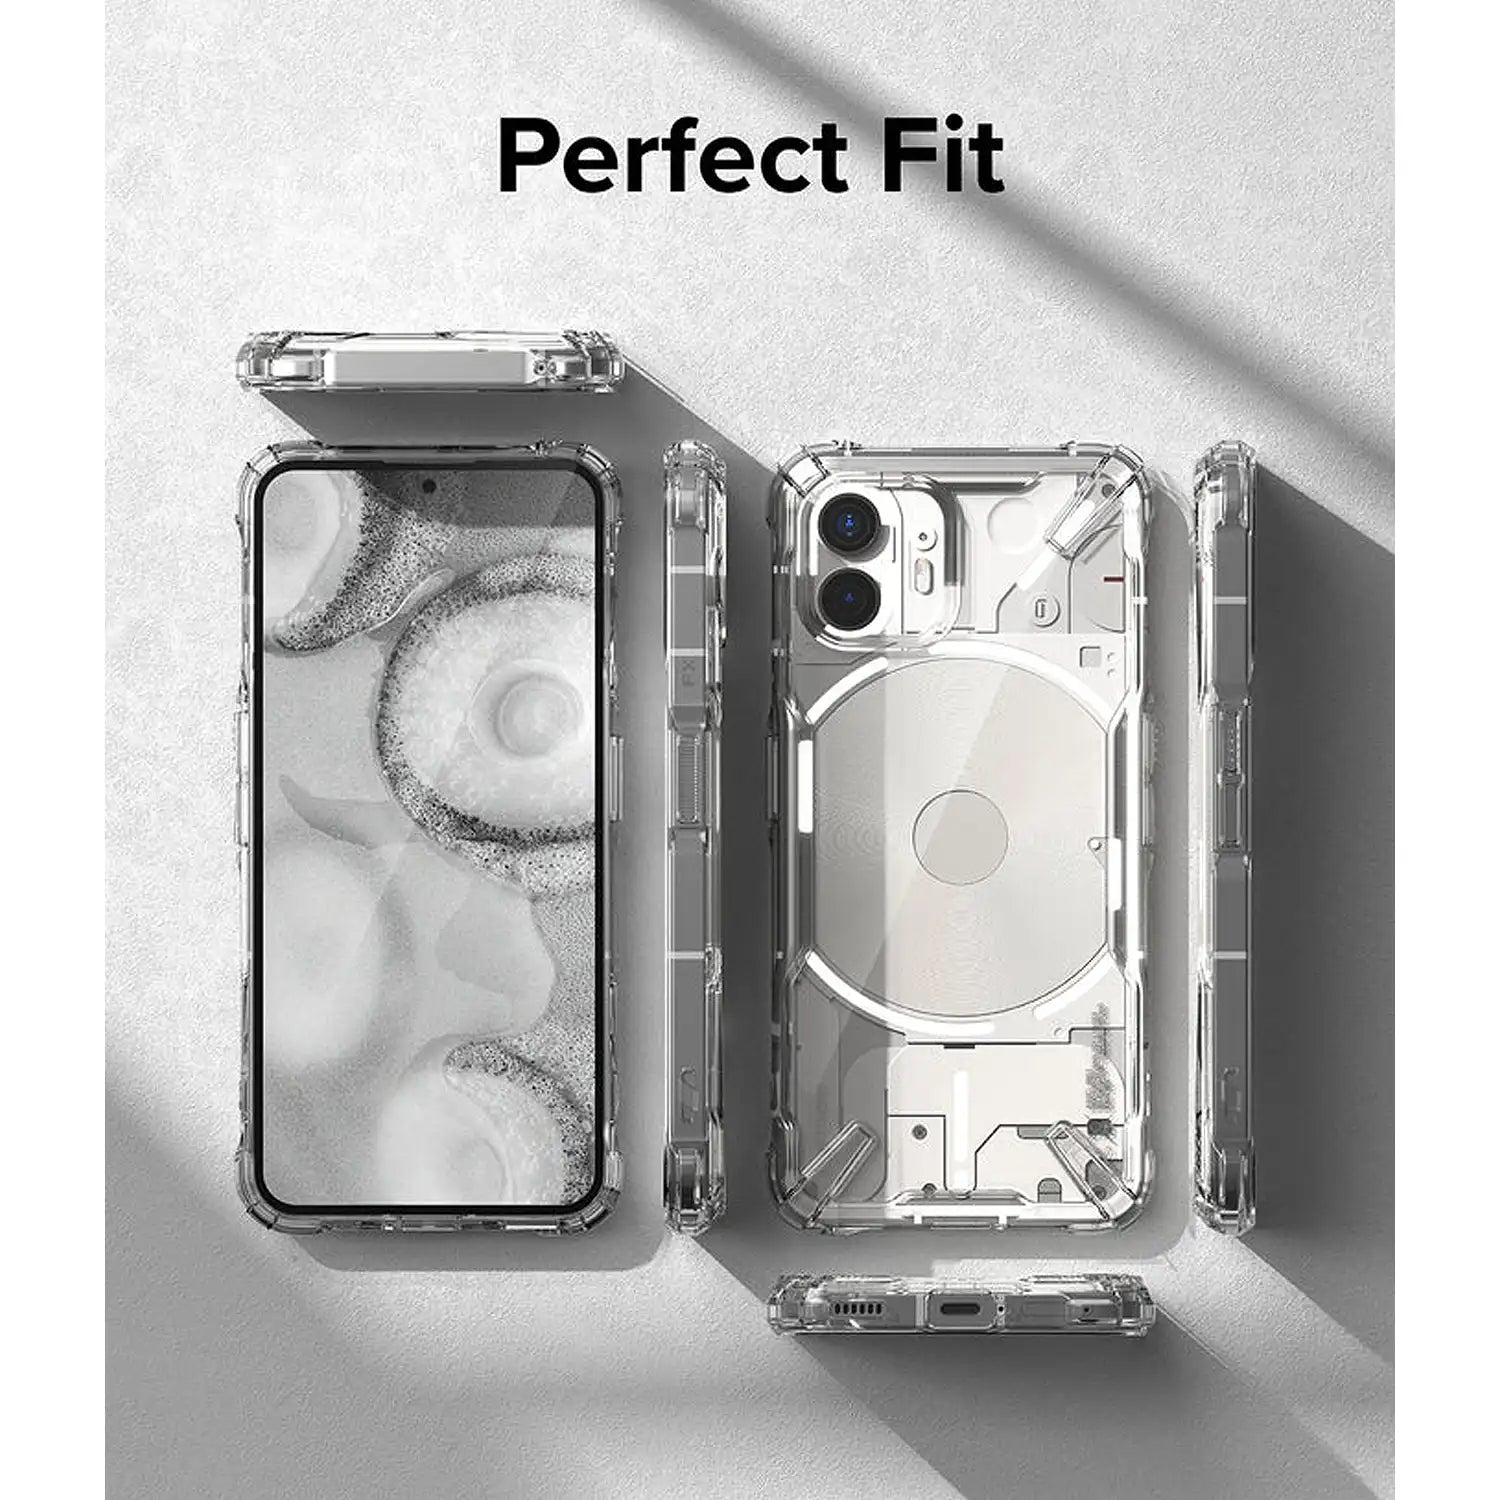 Ringke Fusion-X Case for Nothing Phone 2, Transparent Hard Back Soft Flexible TPU Bumper Scratch Resistant Shockproof Protection Back Cover